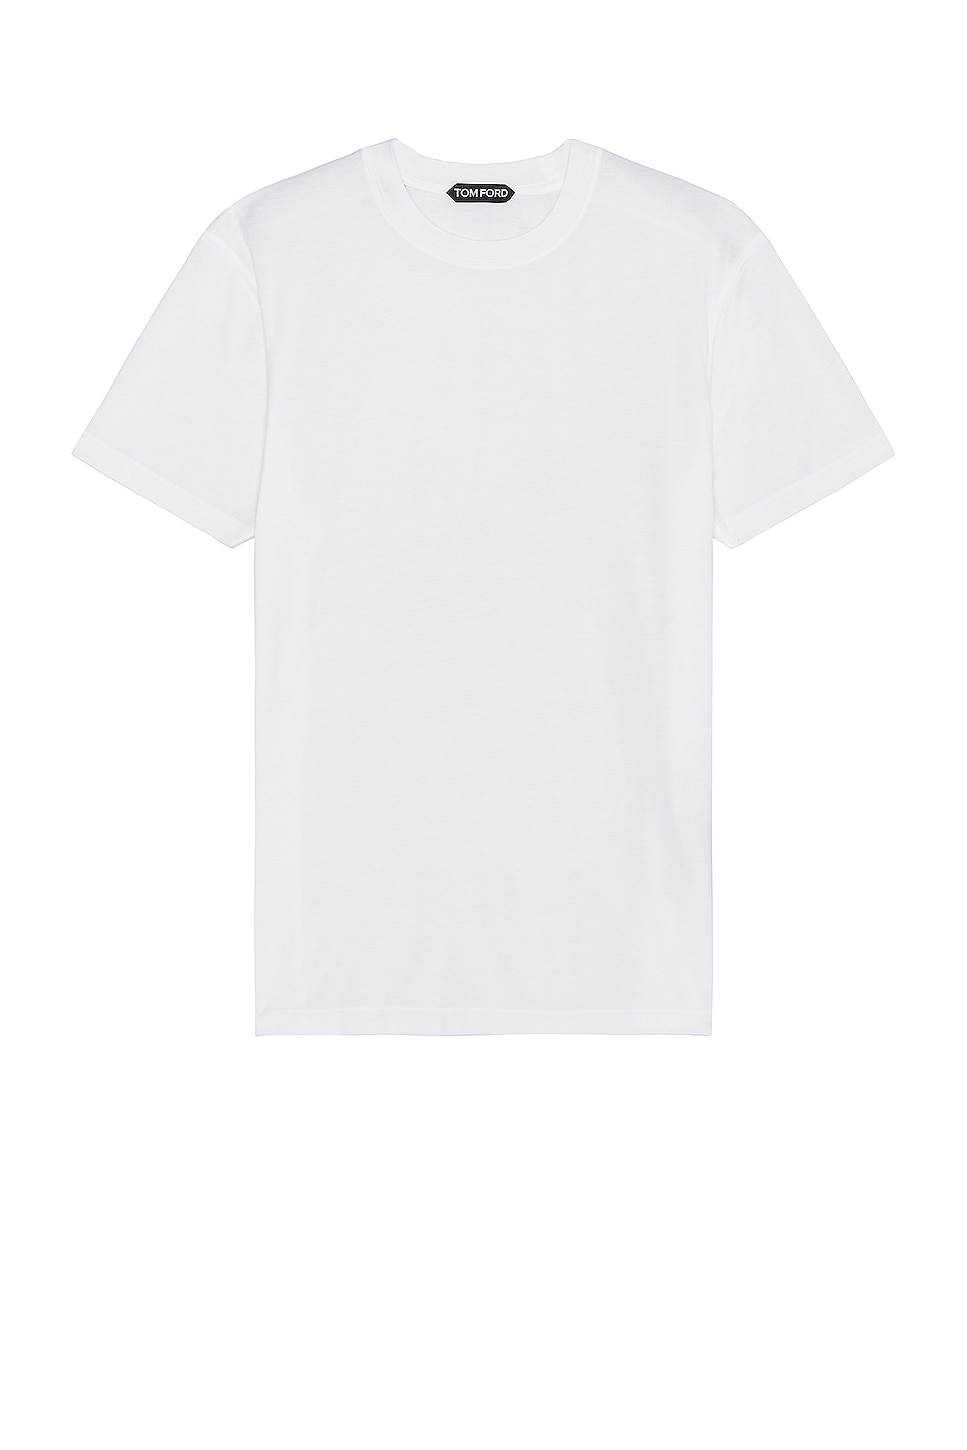 Image 1 of TOM FORD Crewneck T-shirt in White